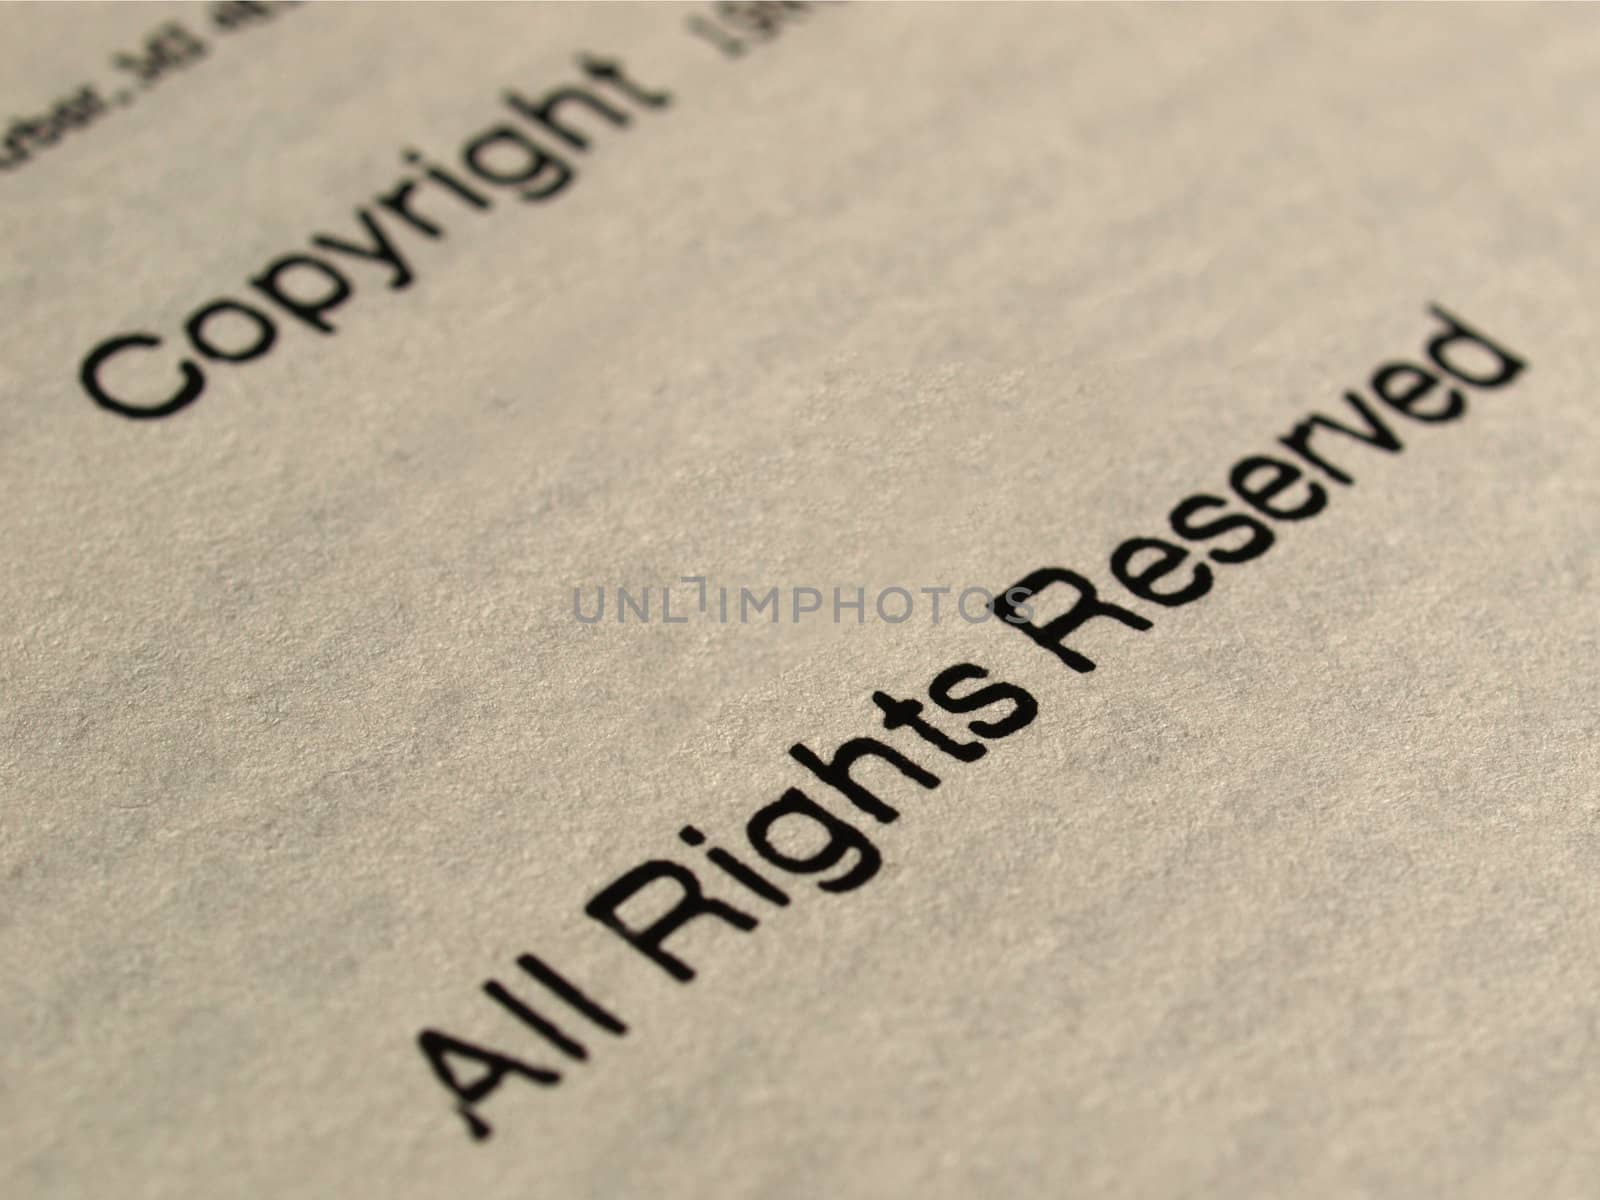 Copyright notice, All rights reserved on a book frontspice